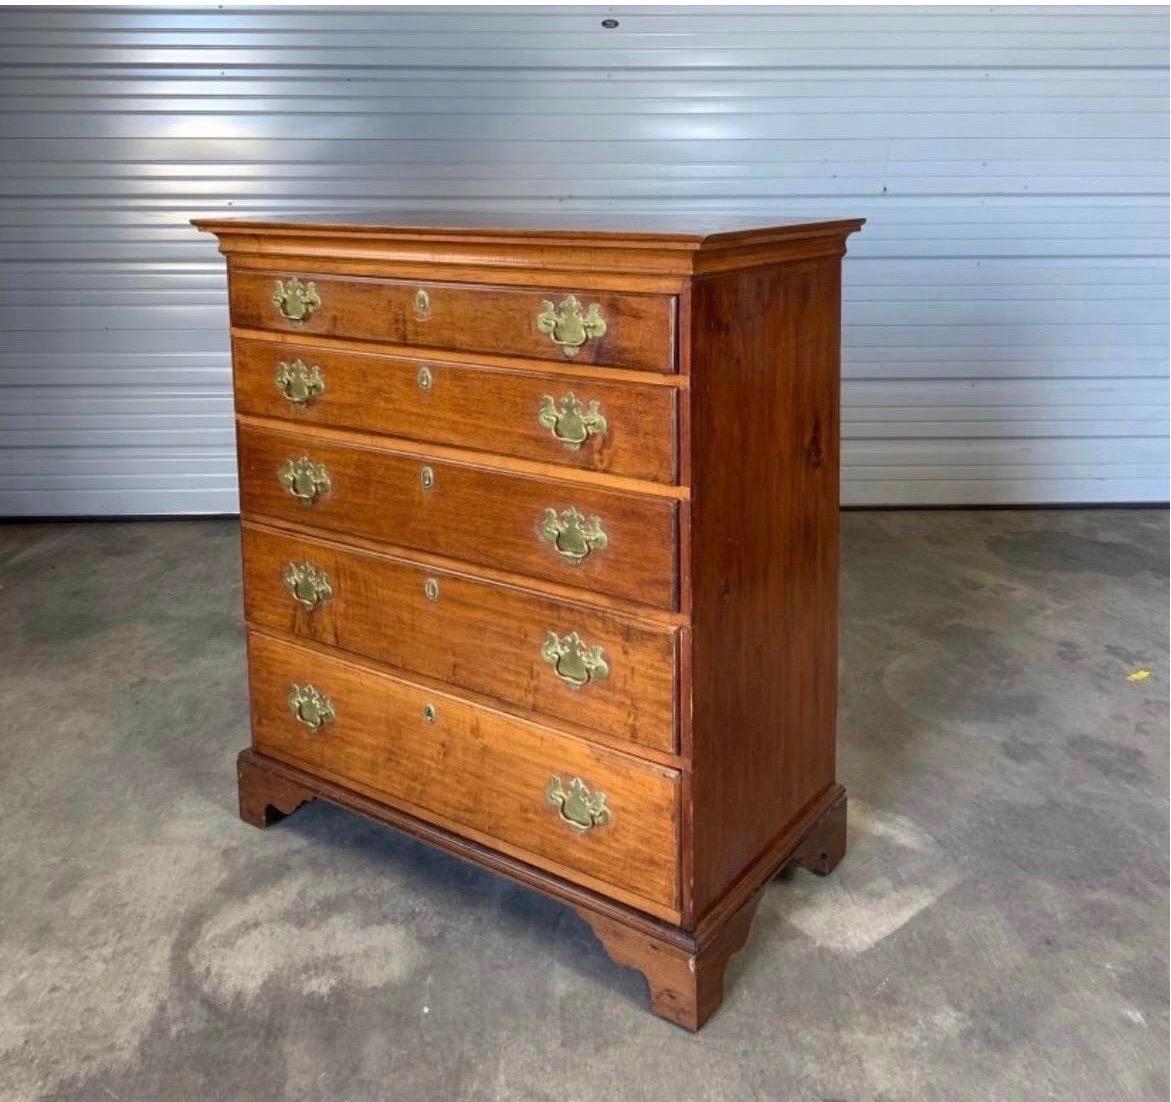 Beautiful antique 5 drawer American chippendale chest with unique top inlay. Appears nearly all original with a beautiful size and form.